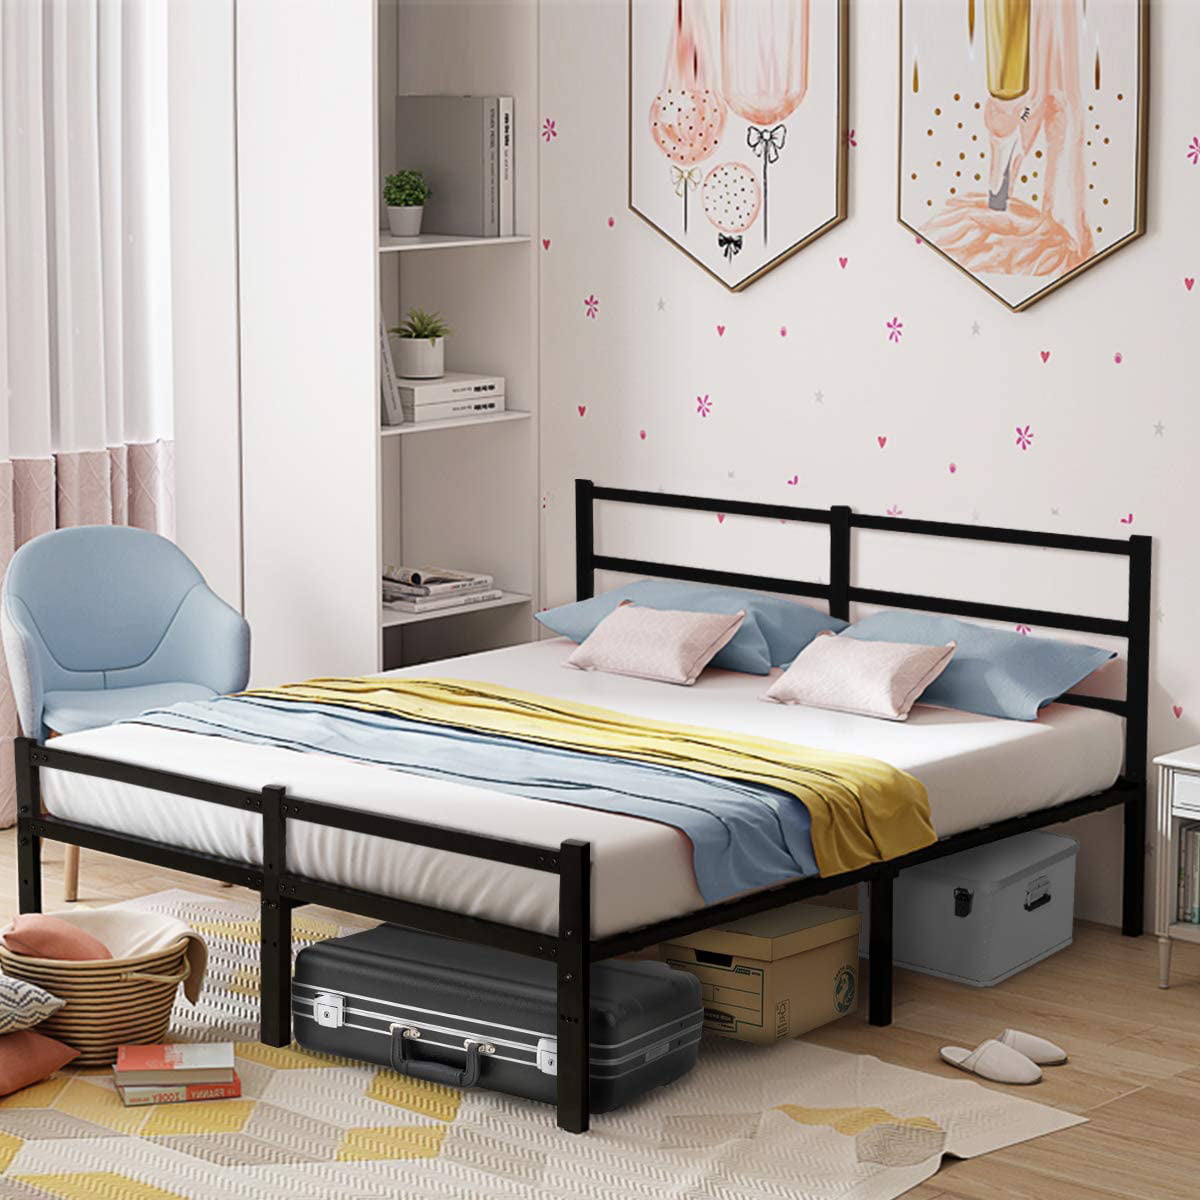 Queen Bed Frames With Headboard Black, How To Make A Queen Bed Frame With Storage